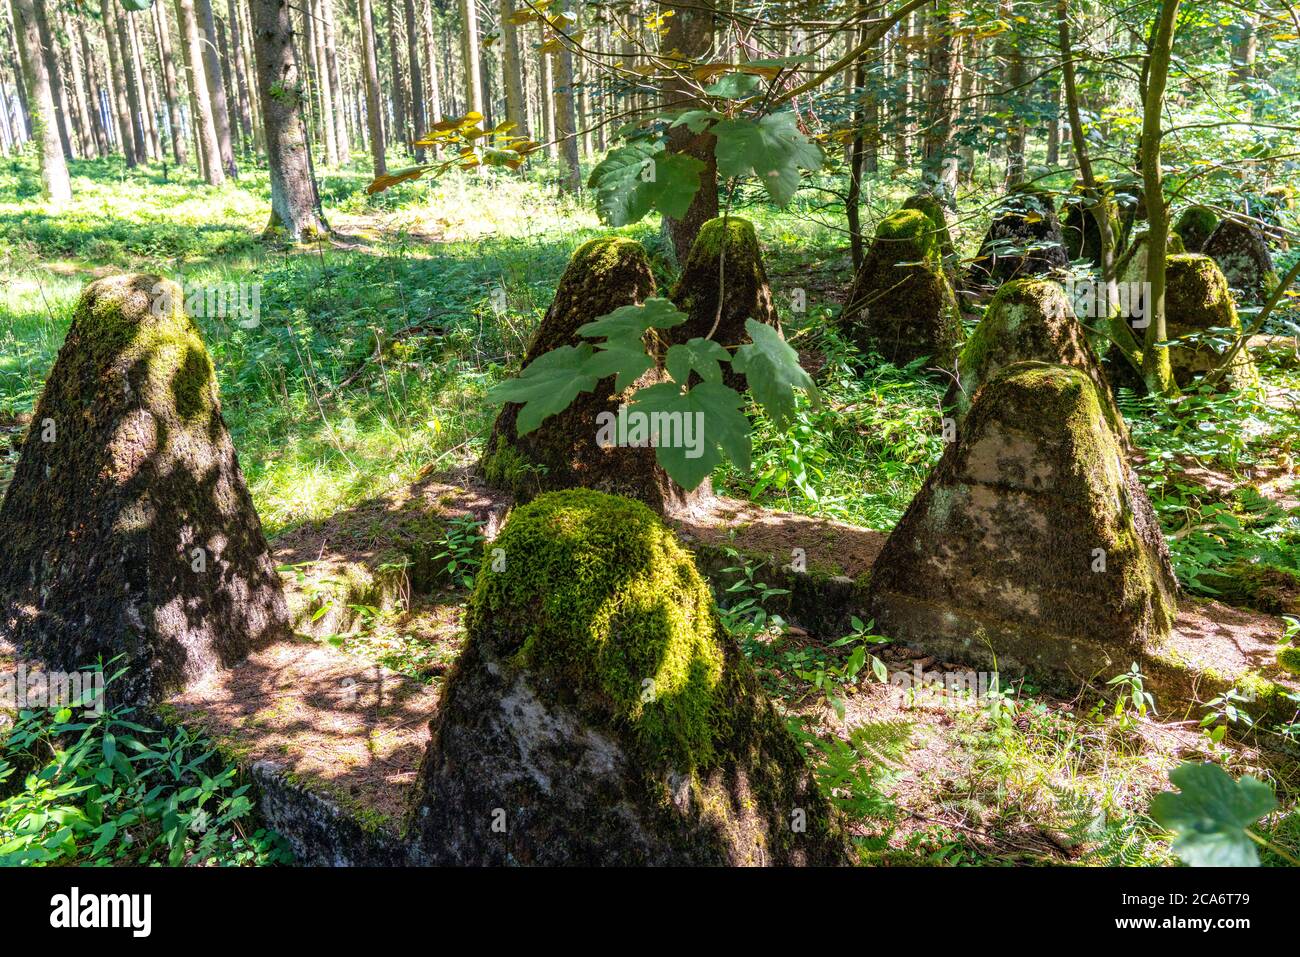 Remains of the former Westwall, tank traps, on the border with Belgium, in a forest near the village of Miescheid, NRW, Germany, Stock Photo